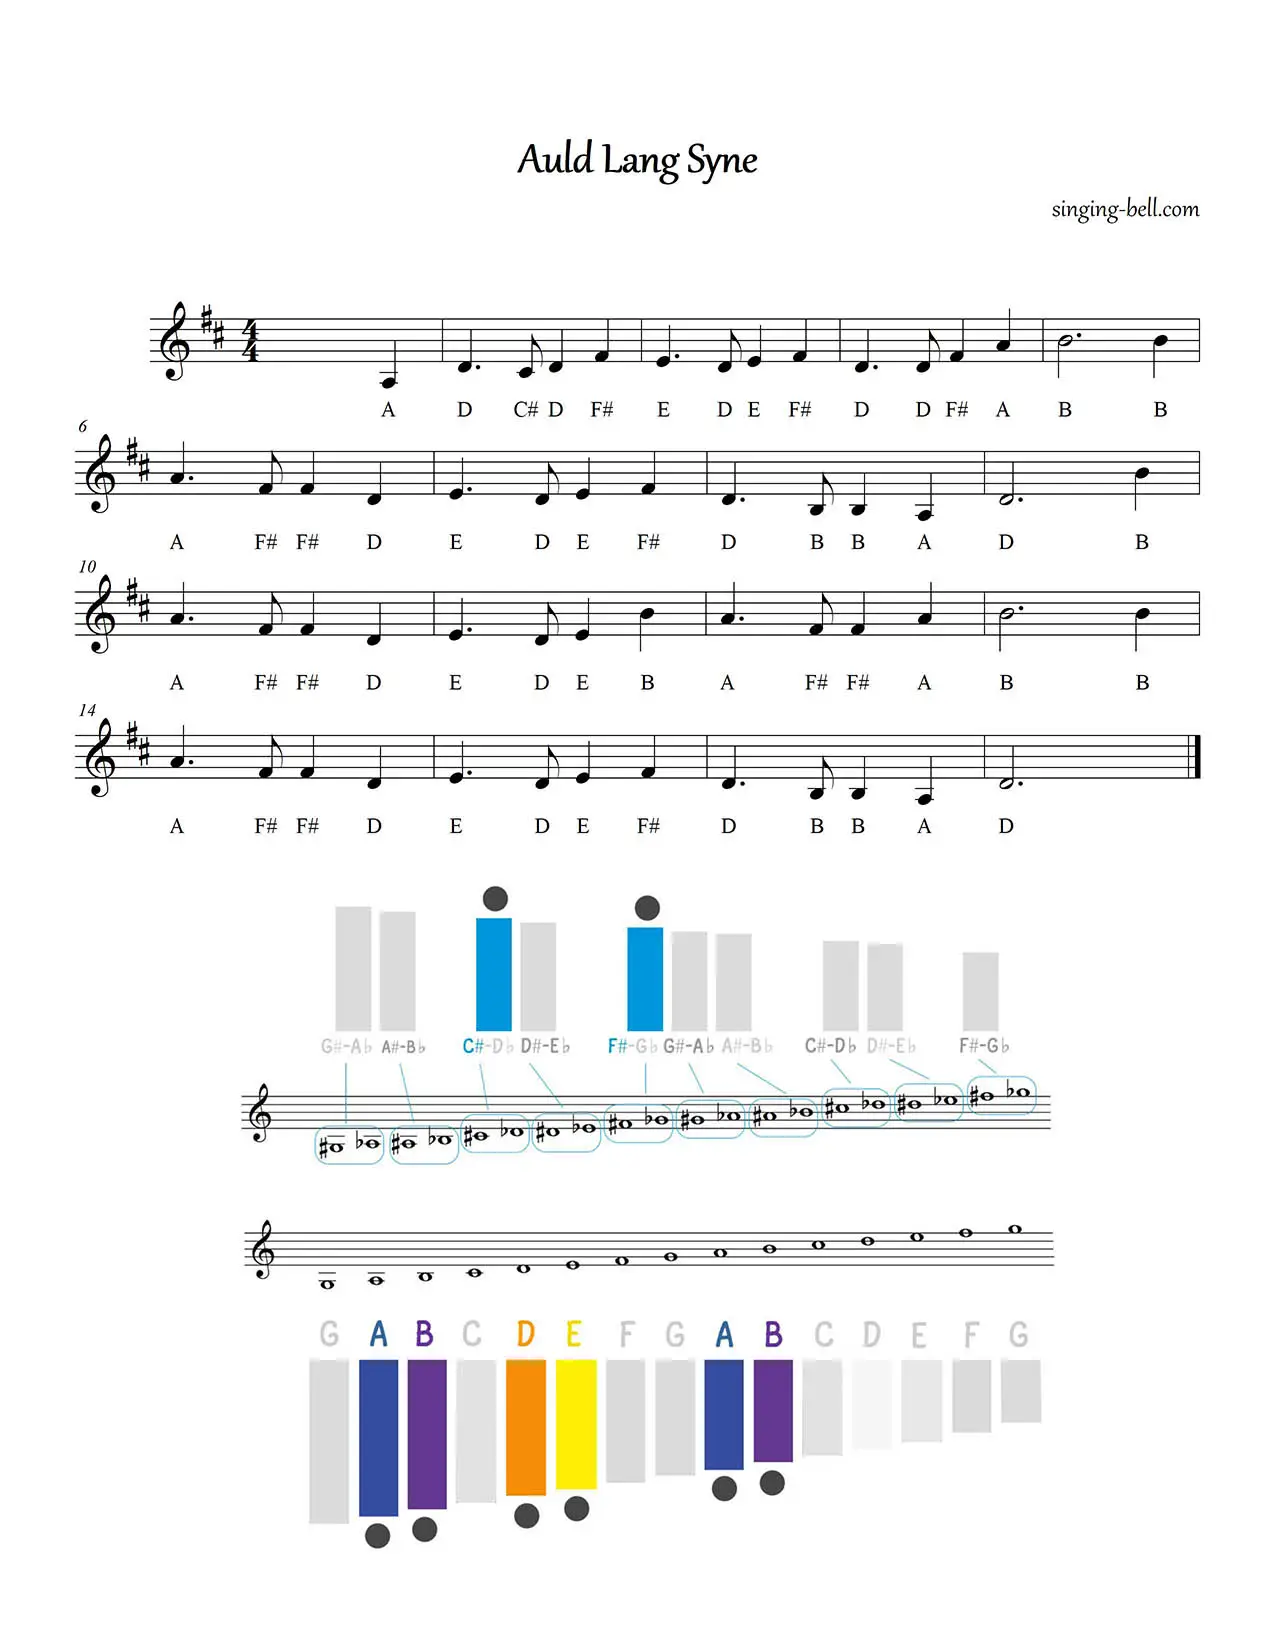 Auld Lang Syne free xylophone glockenspiel sheet music in D notes chart pdf